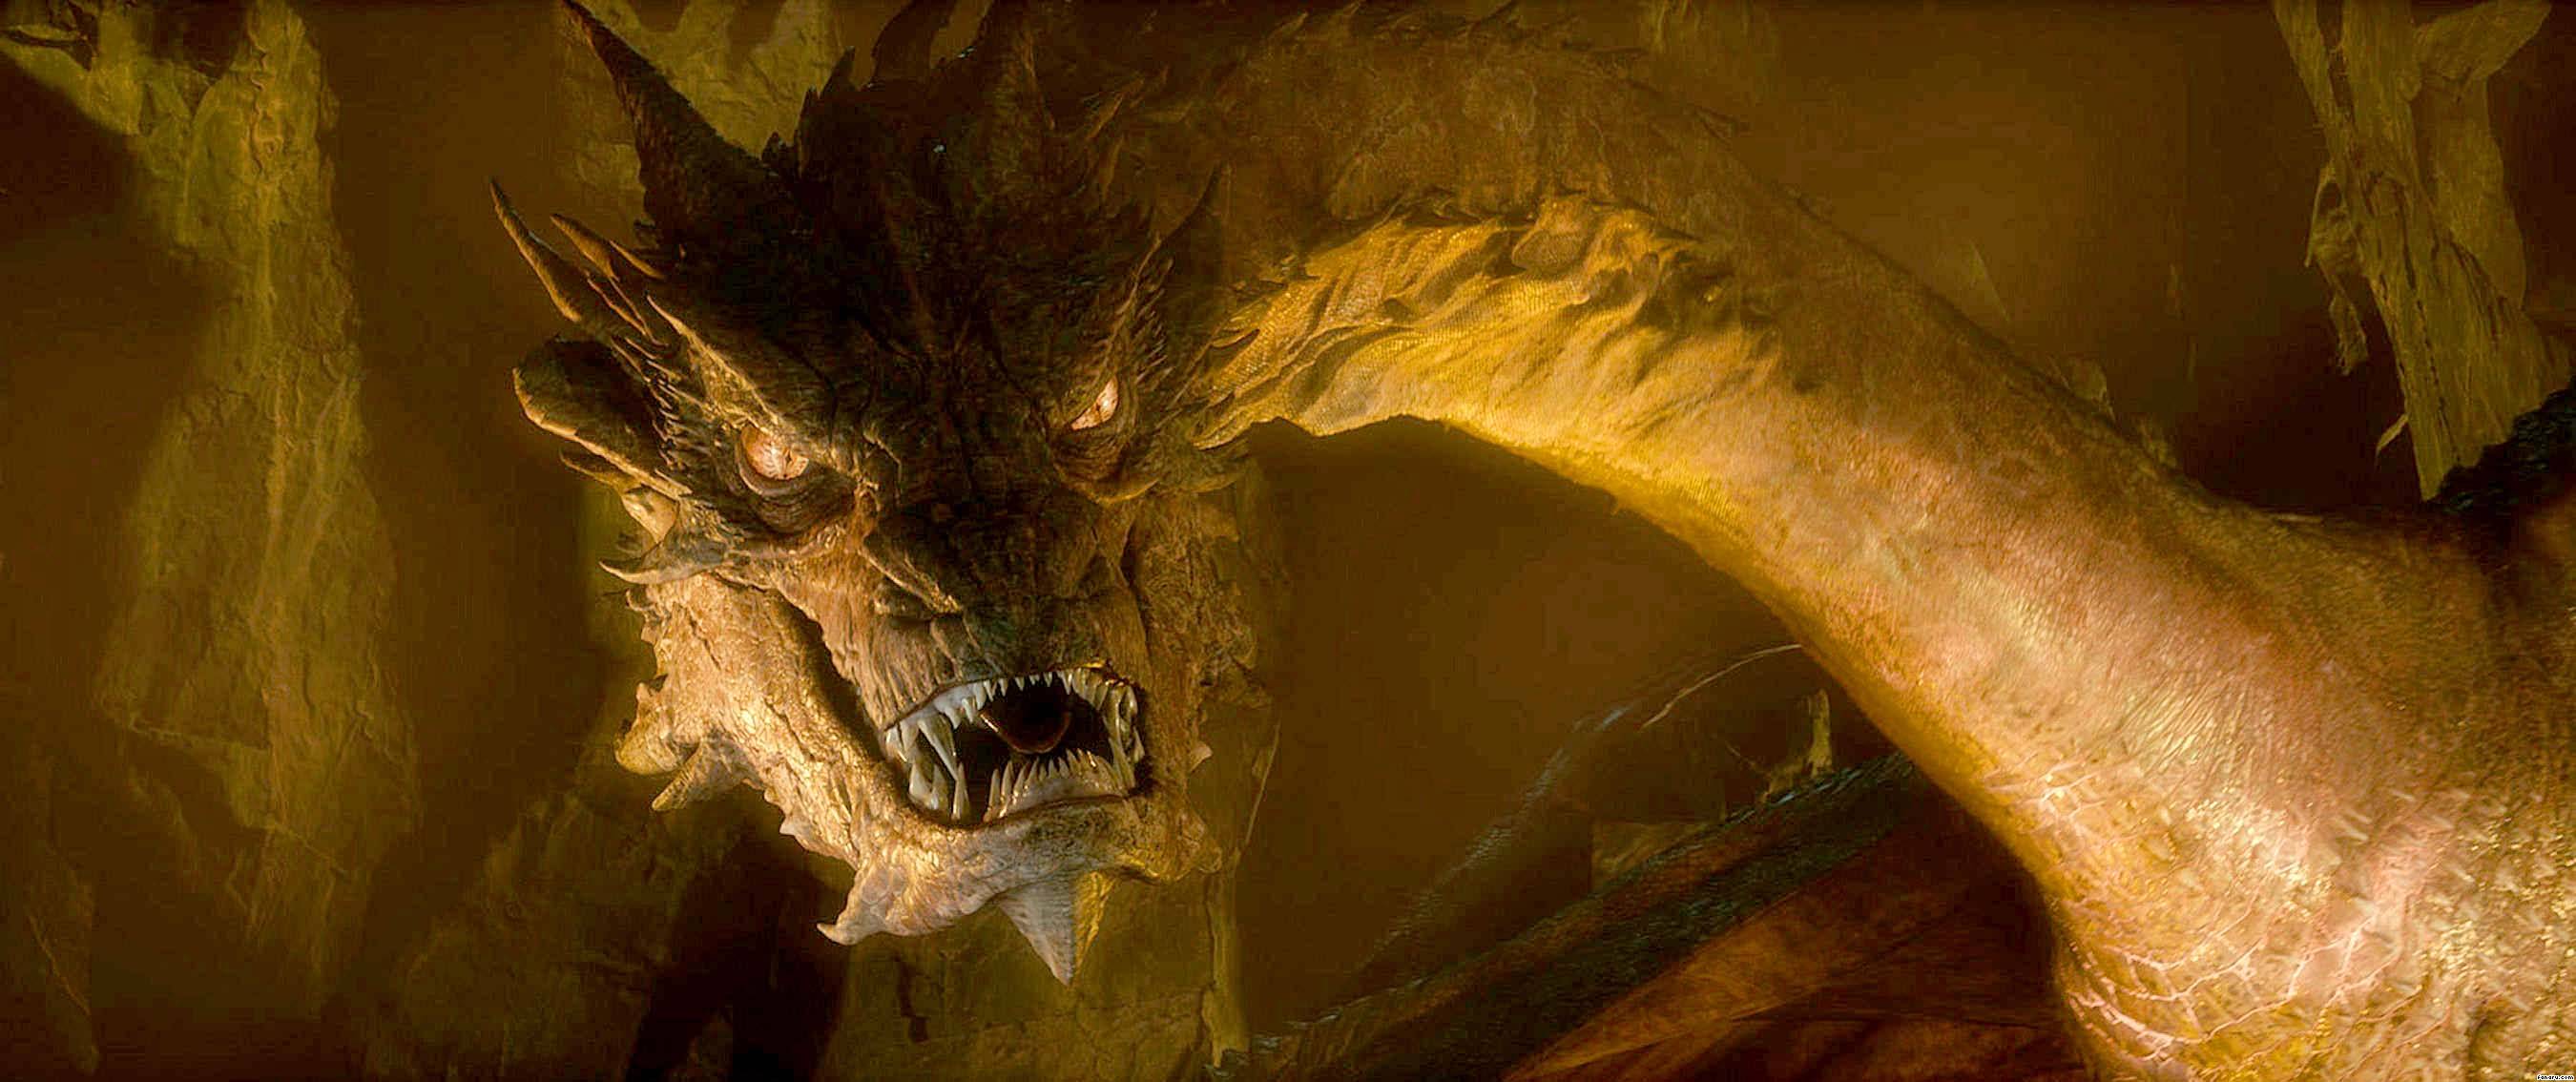 Quotes From The Hobbit Dragon. QuotesGram